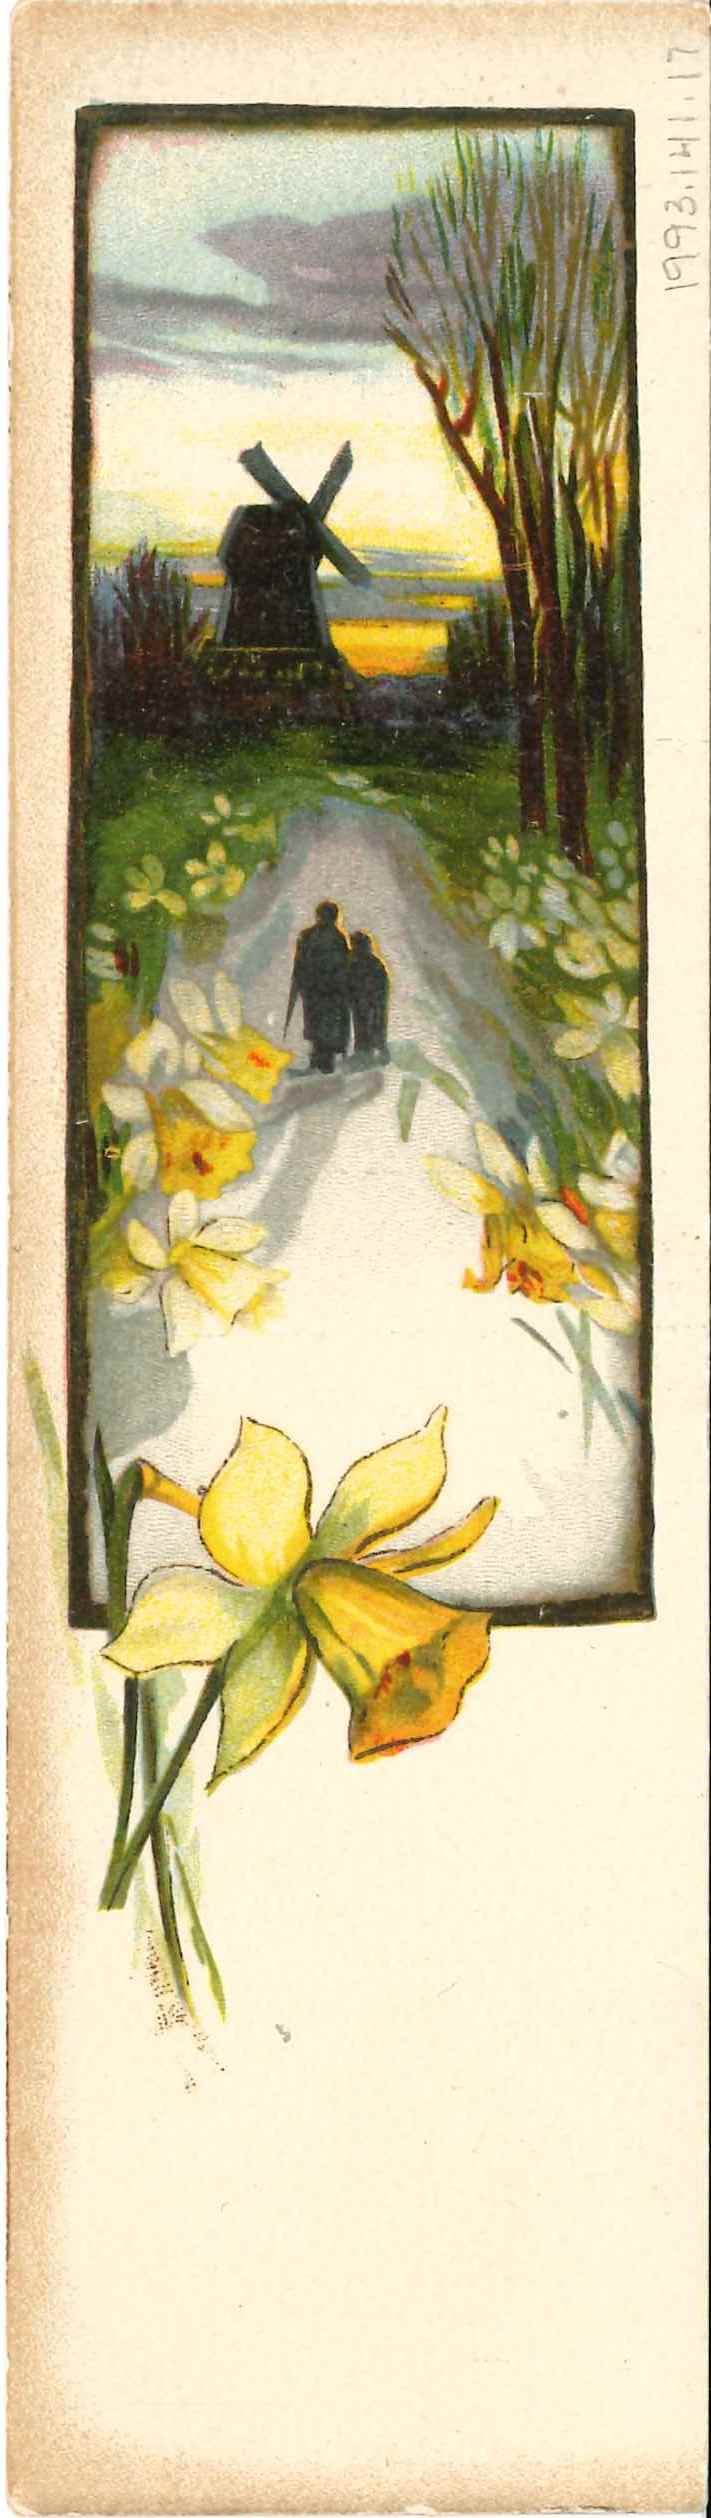 Bonus daffodils! An illustration from a giveaway bookmark, advertising the book department at Joel Gutman & Co., circa 1915. Anonymous donation.  JMM 1993.141.17